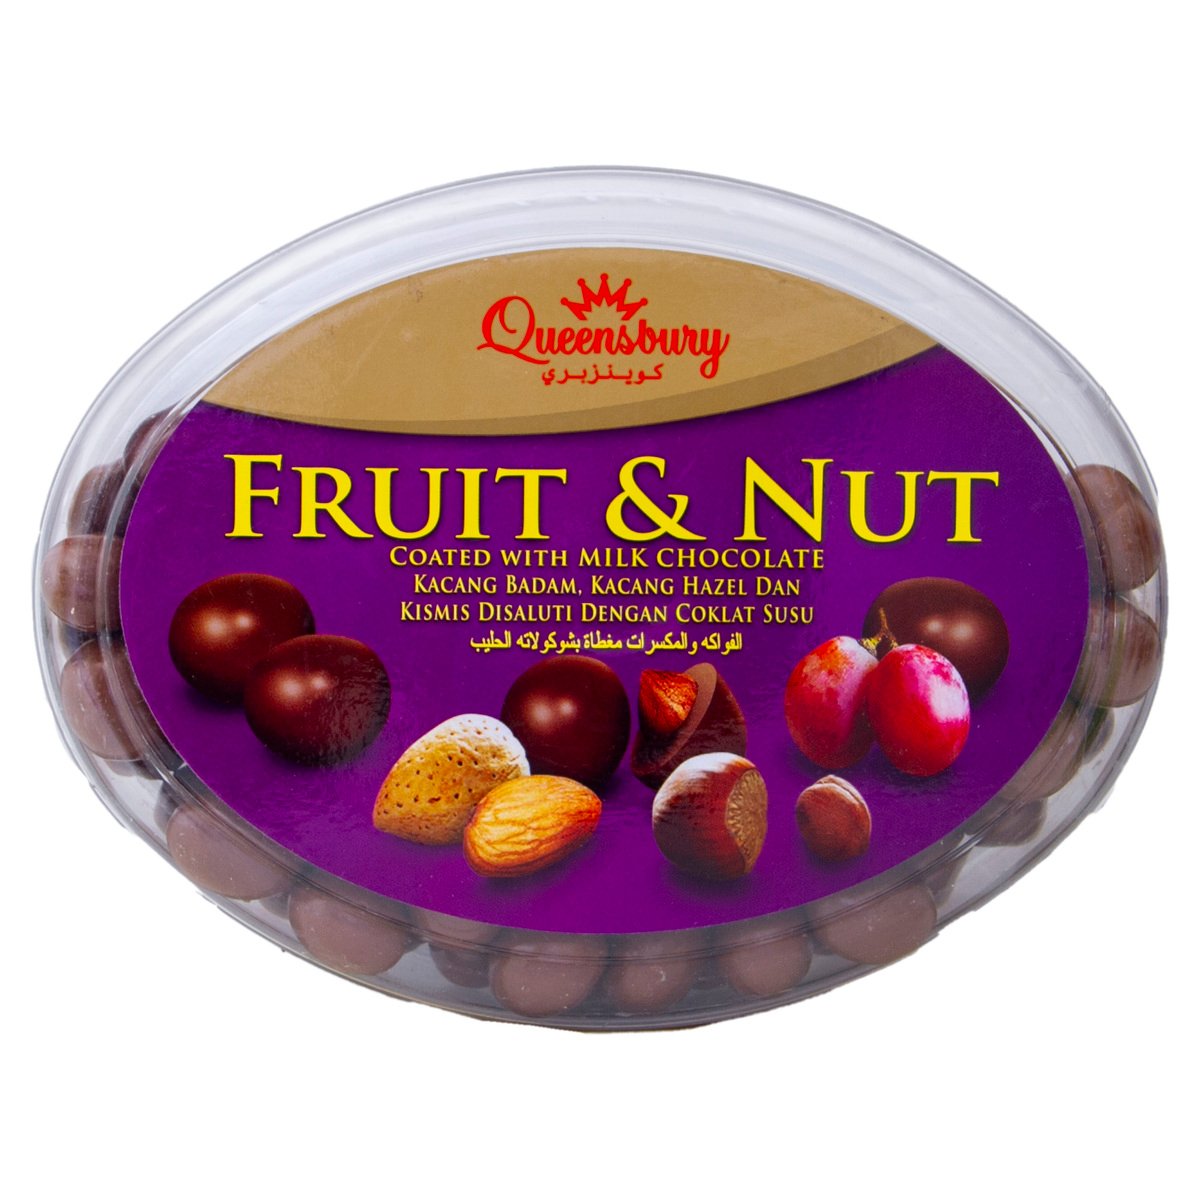 Queensbury Fruit And Nut Coated with Milk Chocolate 450 g